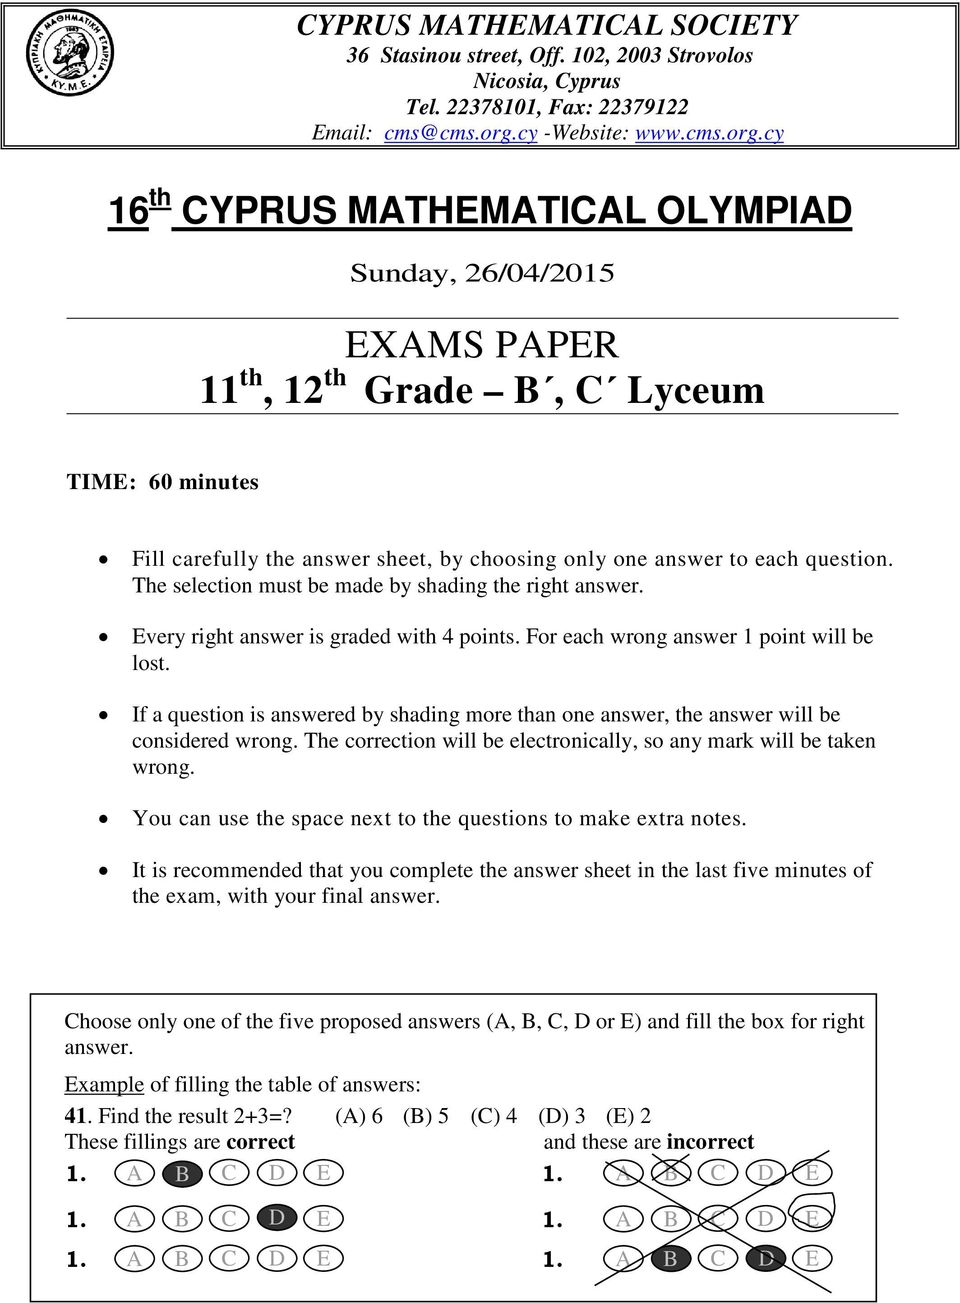 cy 16 th CYPRUS MATHEMATICAL OLYMPIAD Sunday, 26/04/2015 EXAMS PAPER 11 th, 12 th Grade B, C Lyceum TIME: 60 minutes Fill carefully the answer sheet, by choosing only one answer to each question.